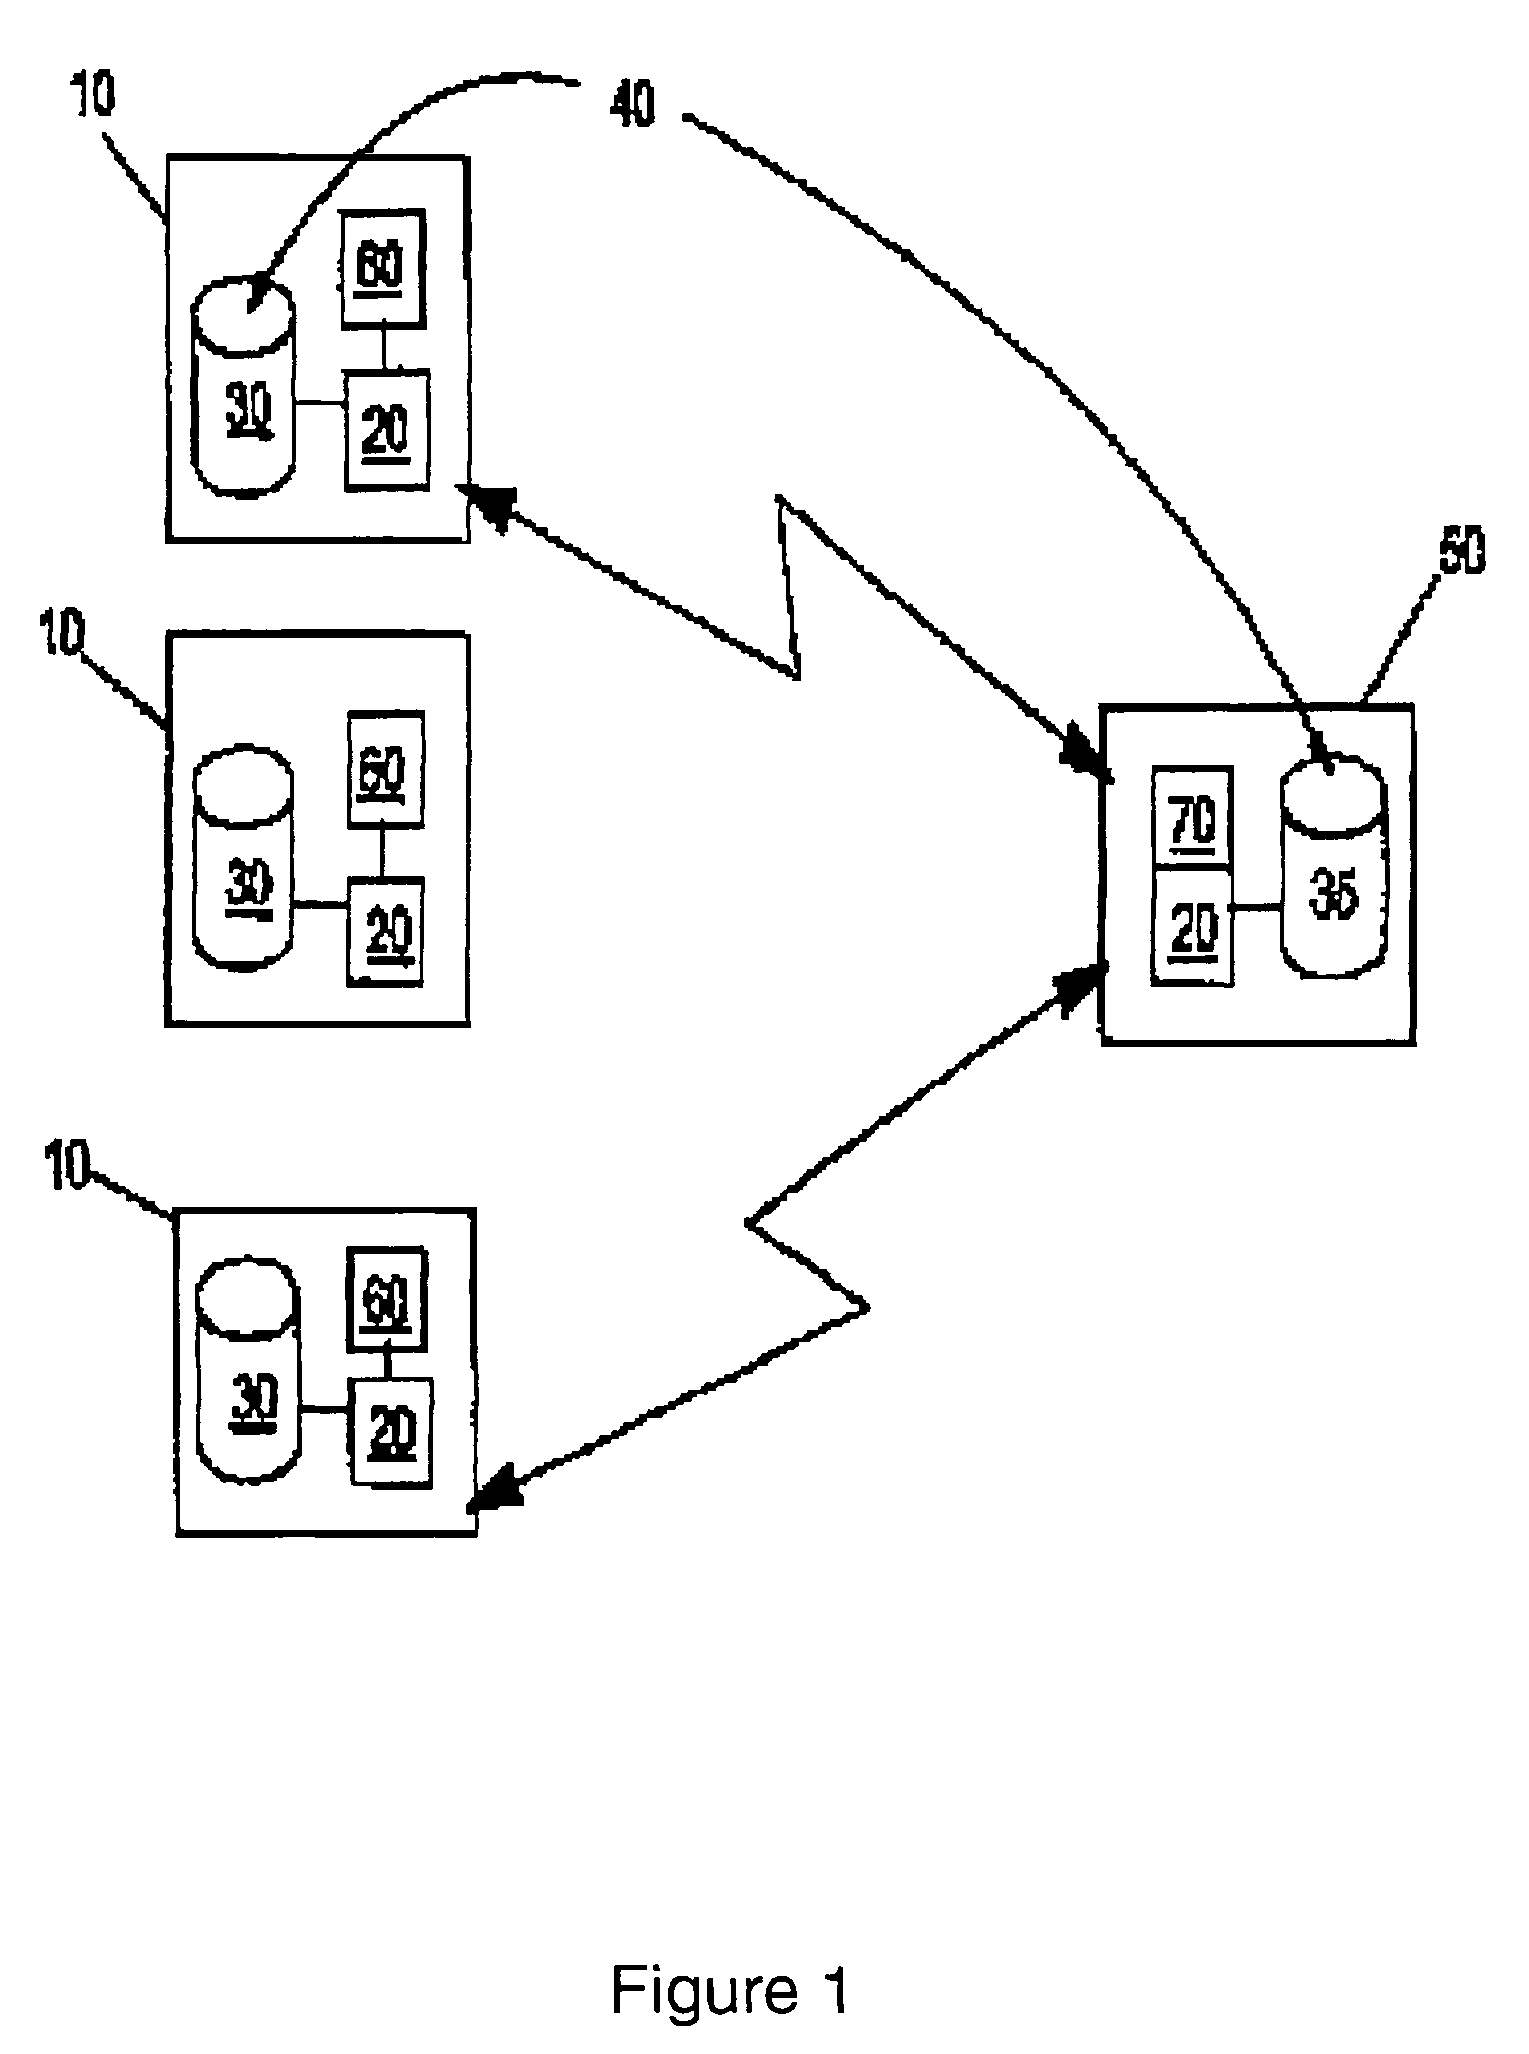 Commitment chains for conflict resolution between disconnected data sharing applications